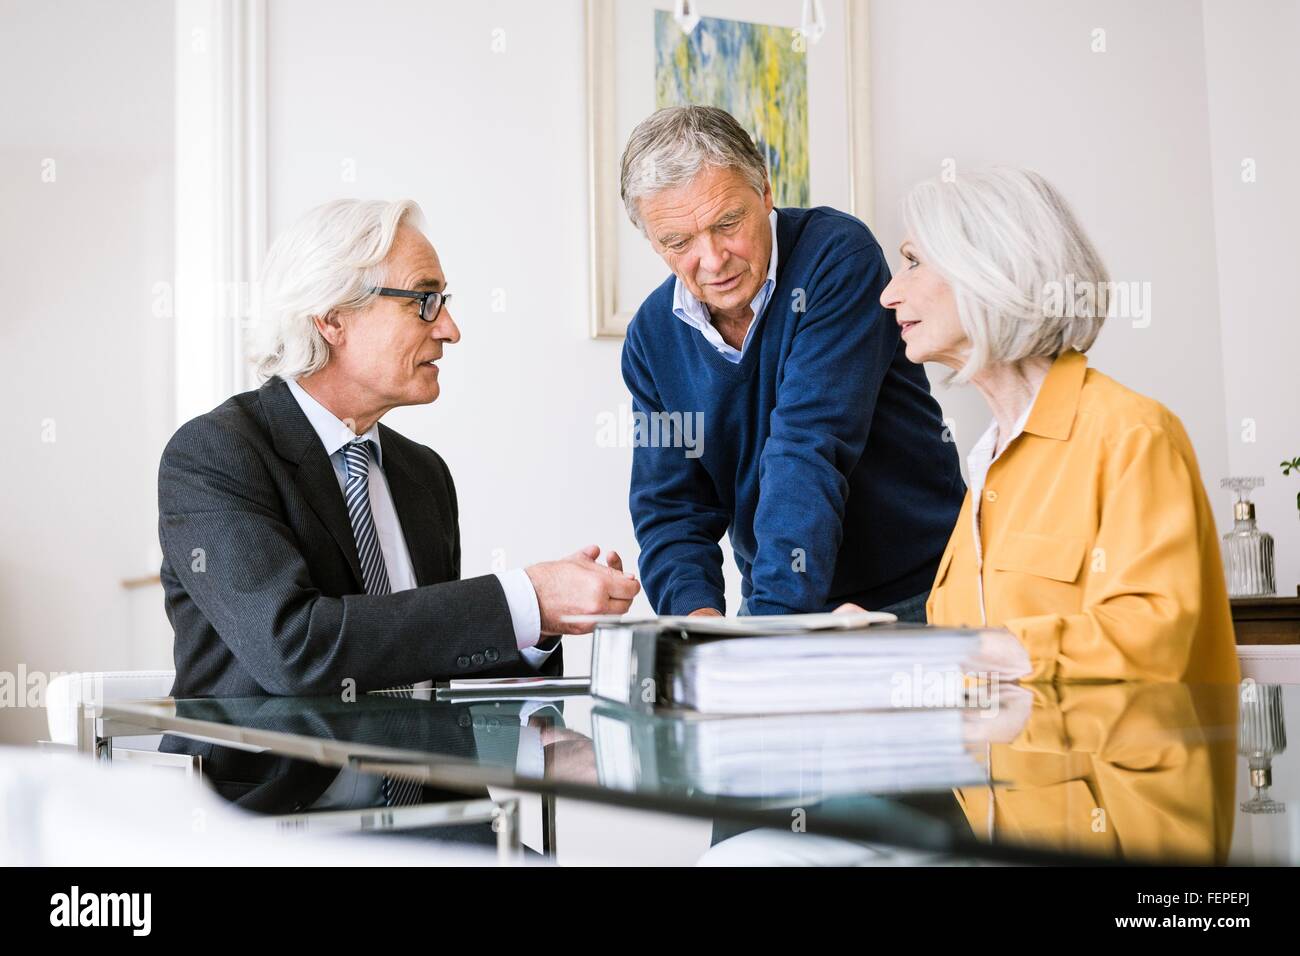 Senior adults in business meeting discussing paperwork Stock Photo